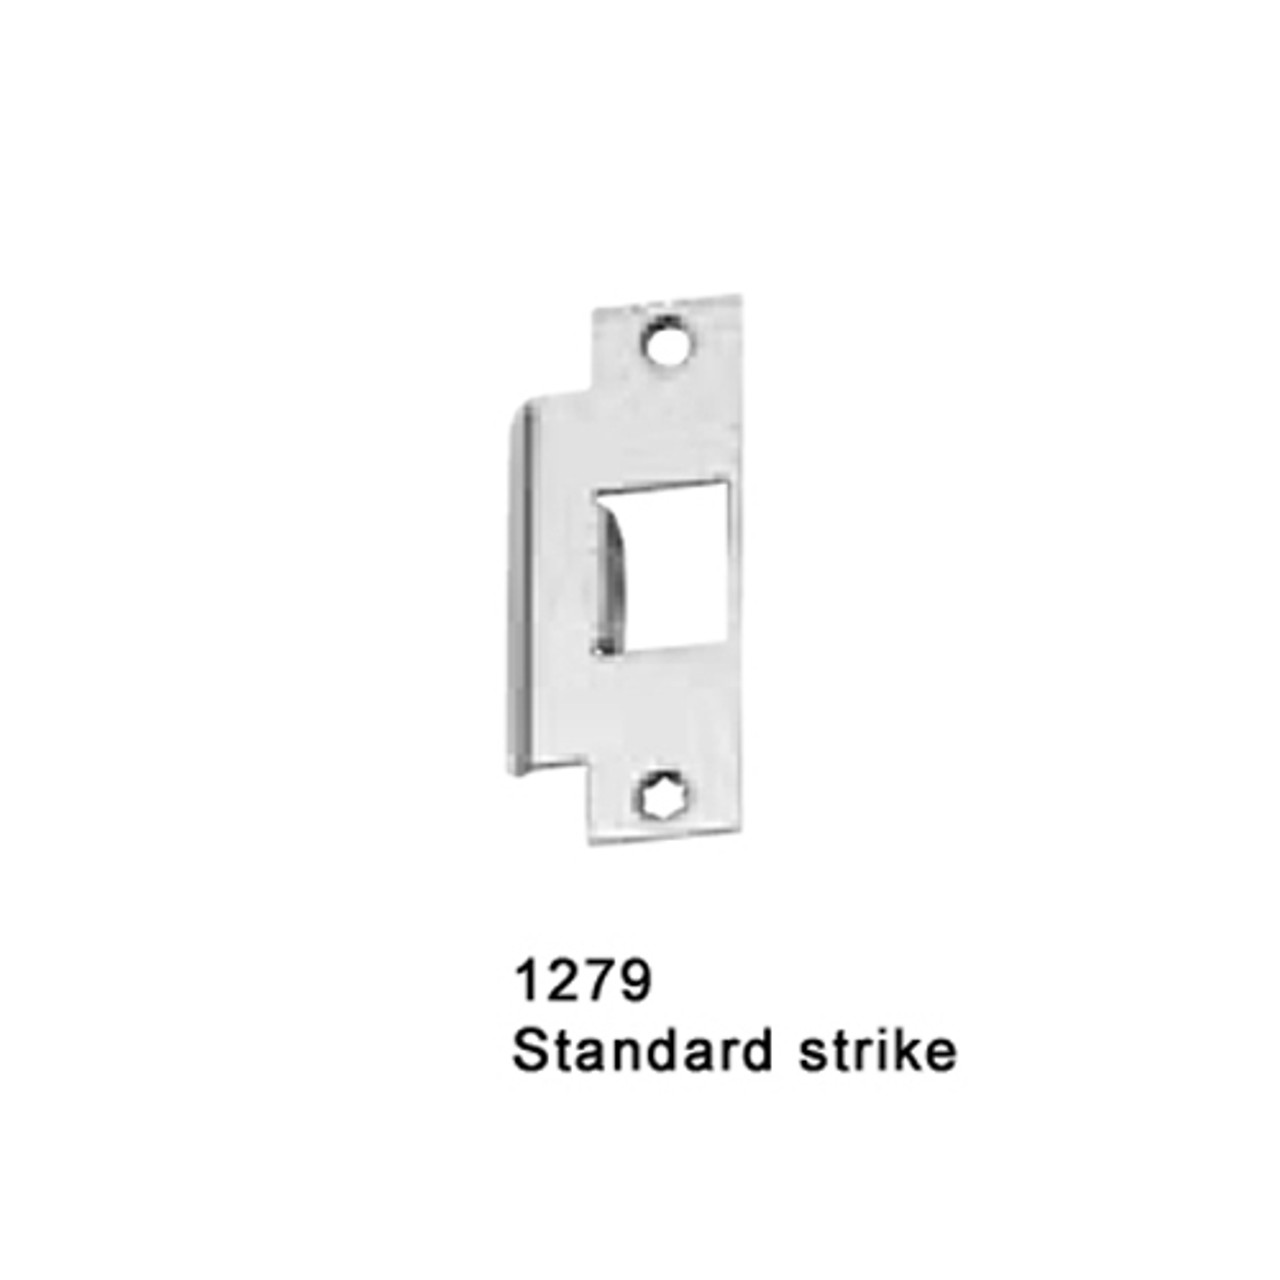 CD25-M-TP-US26-4-LHR Falcon 25 Series Mortise Lock Devices with 512TP Thumbpiece Trim in Polished Chrome